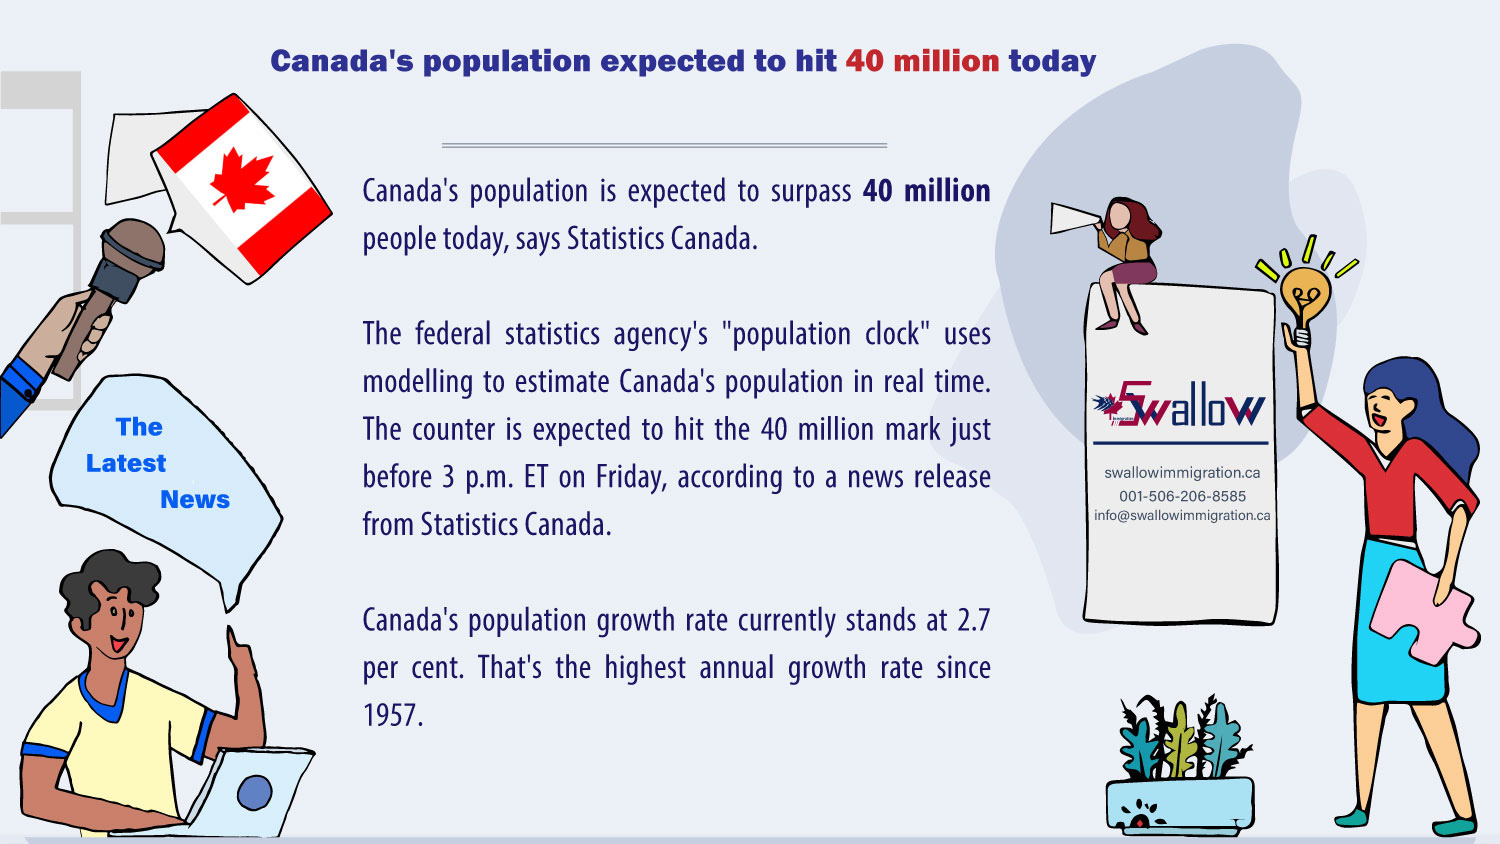 Canada’s population expected to hit 40 million today